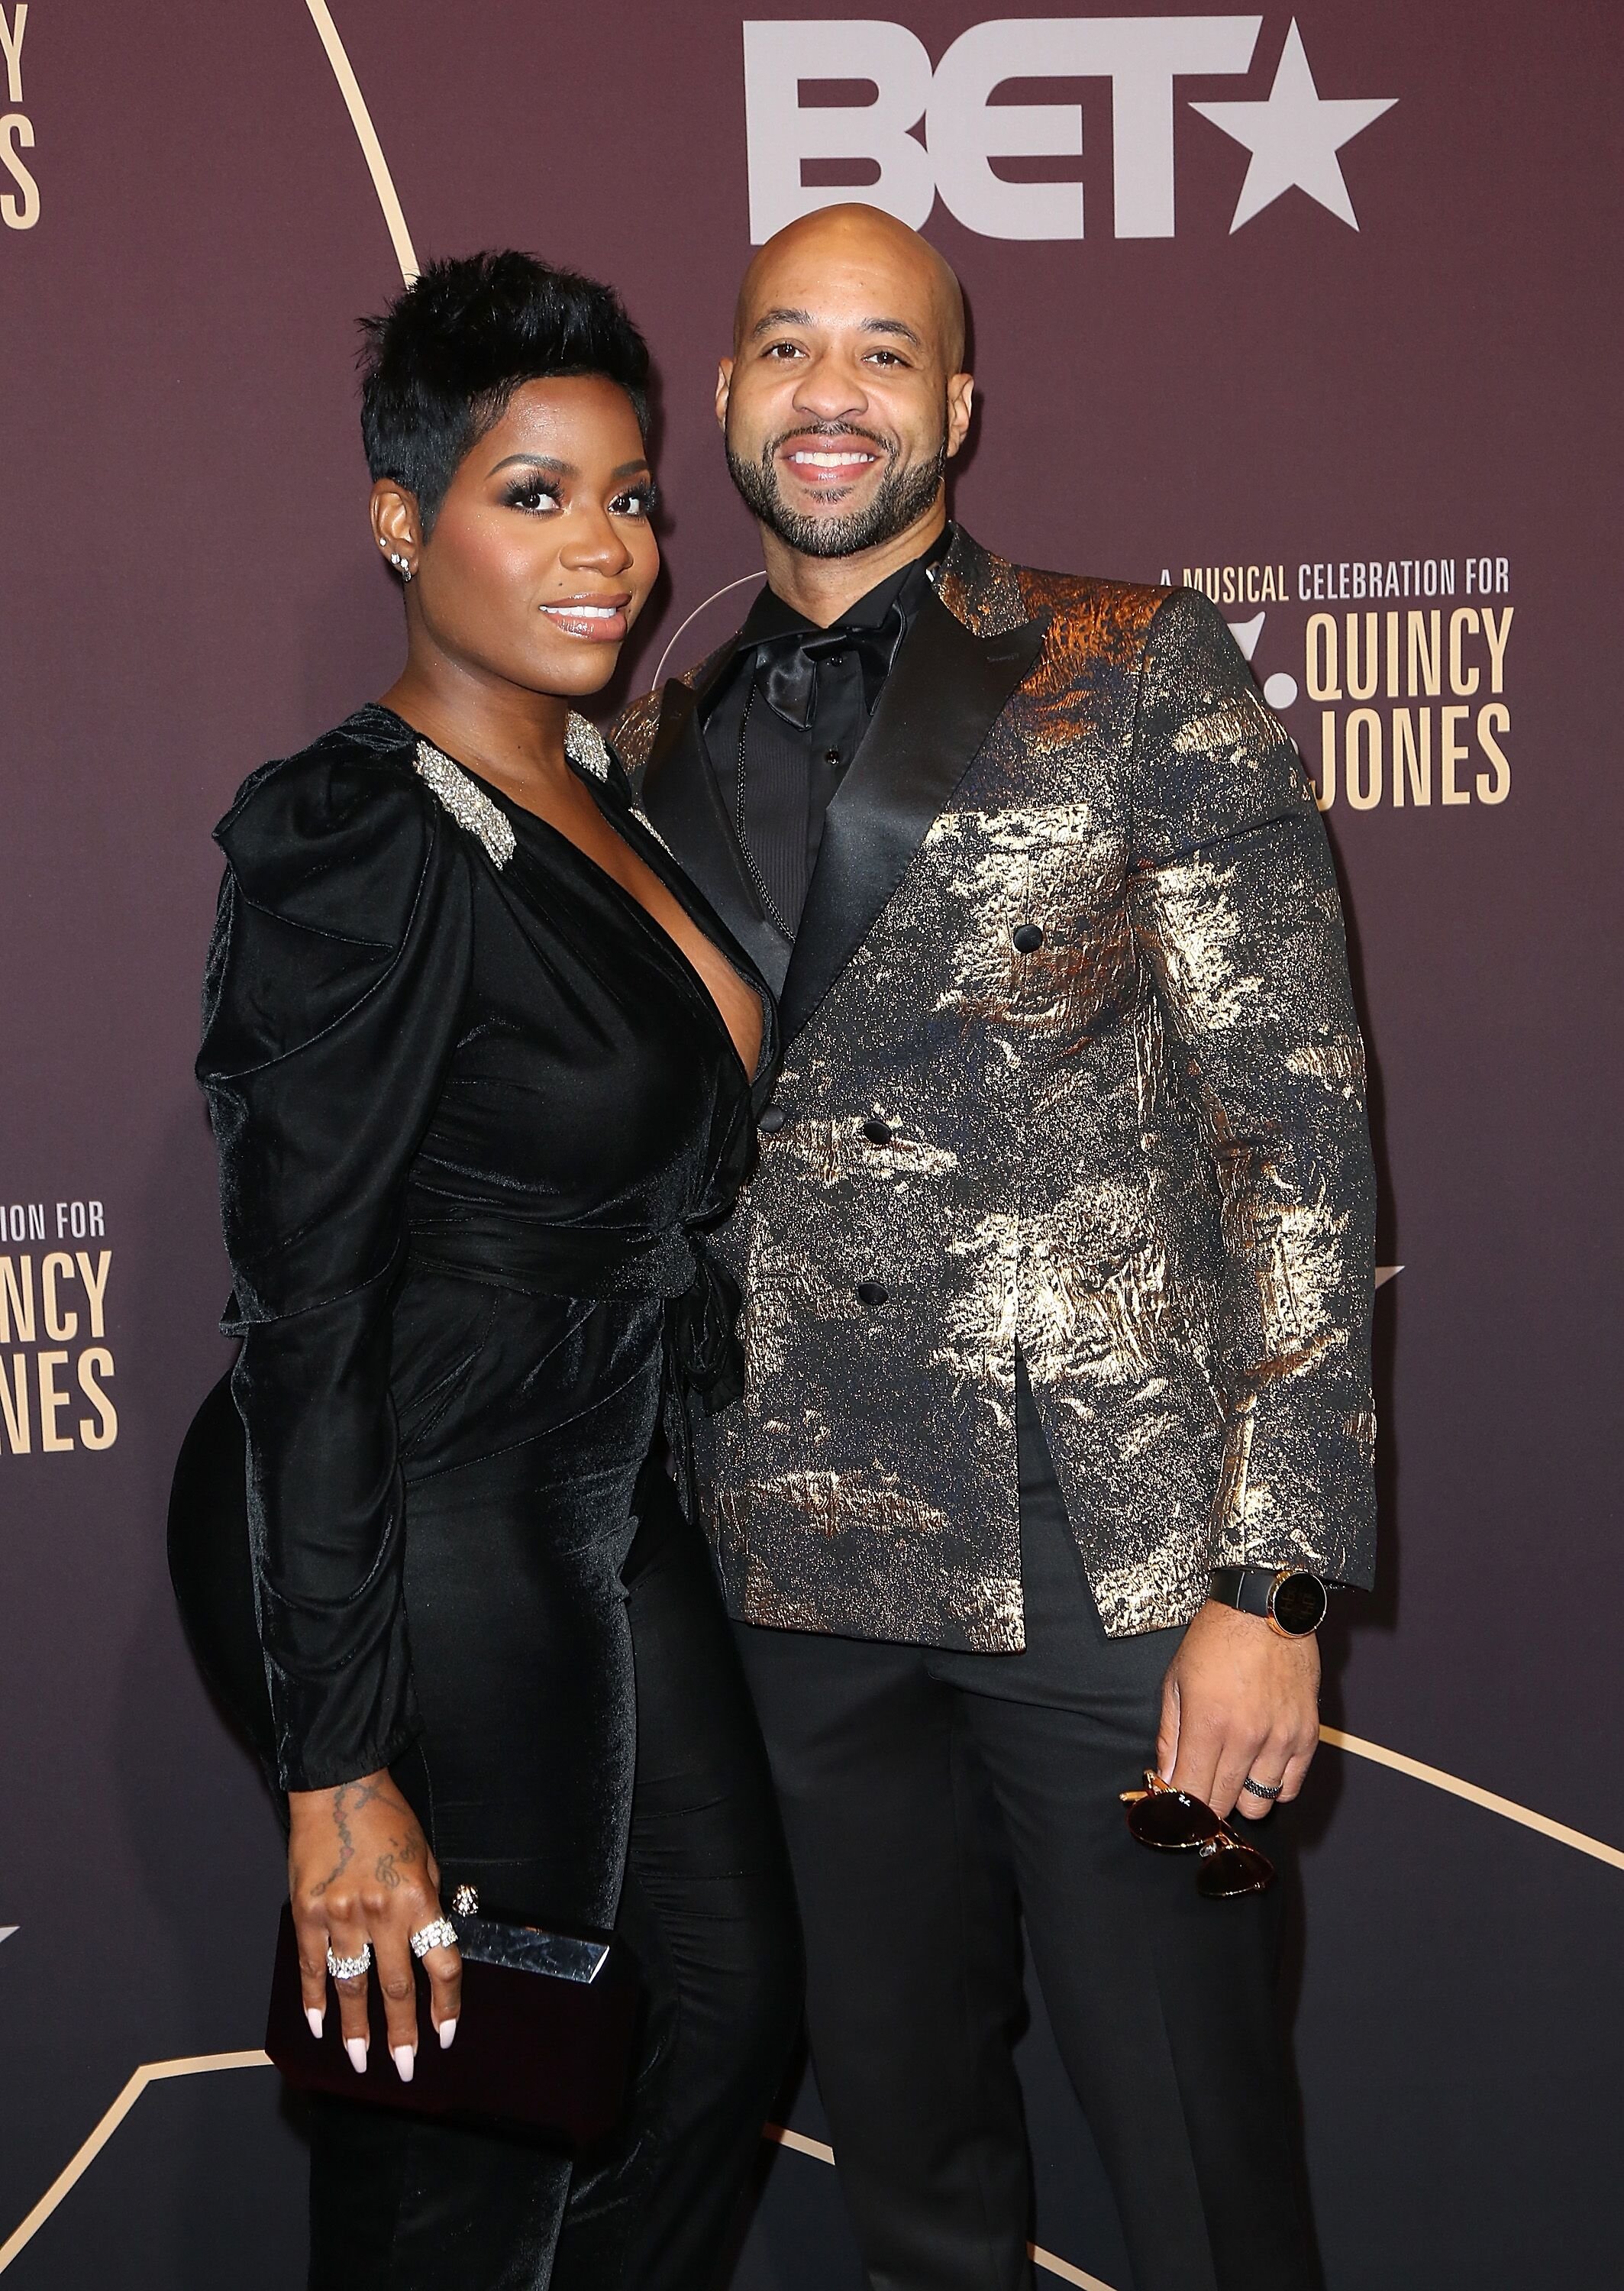 Fantasia Barrino and Kendall Taylor arrive at "Q 85: A Musical Celebration for Quincy Jones" on September 25, 2018 in Los Angeles, California | Photo: Getty Images